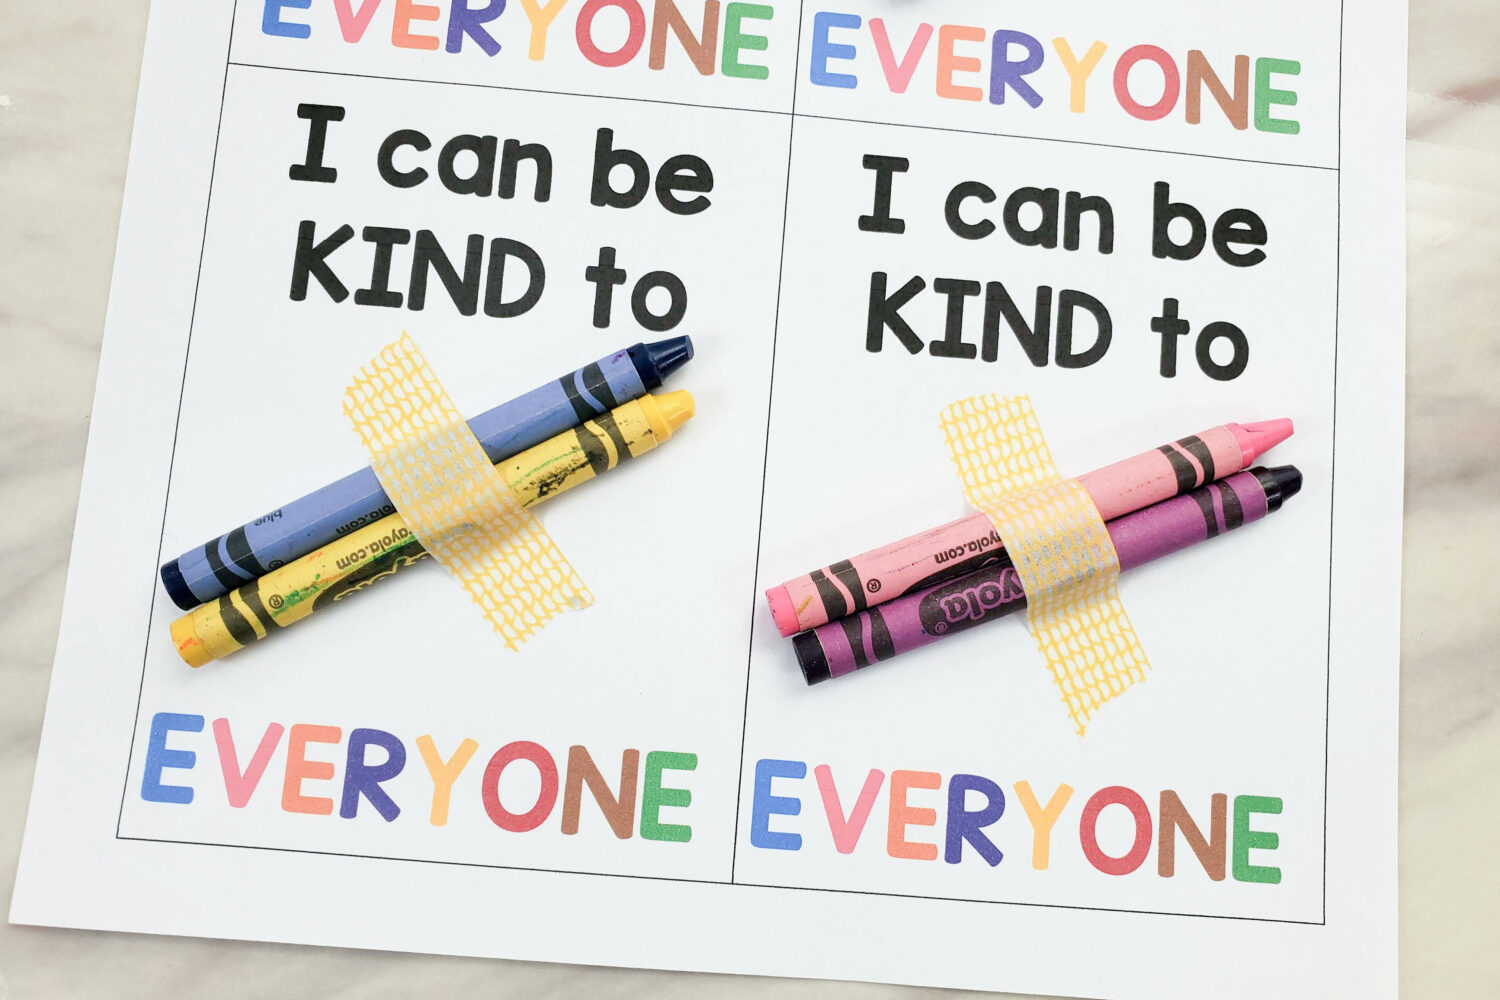 Kindness Begins with Me Hide & Gift singing time idea fun way to spread kindness in your Primary room!